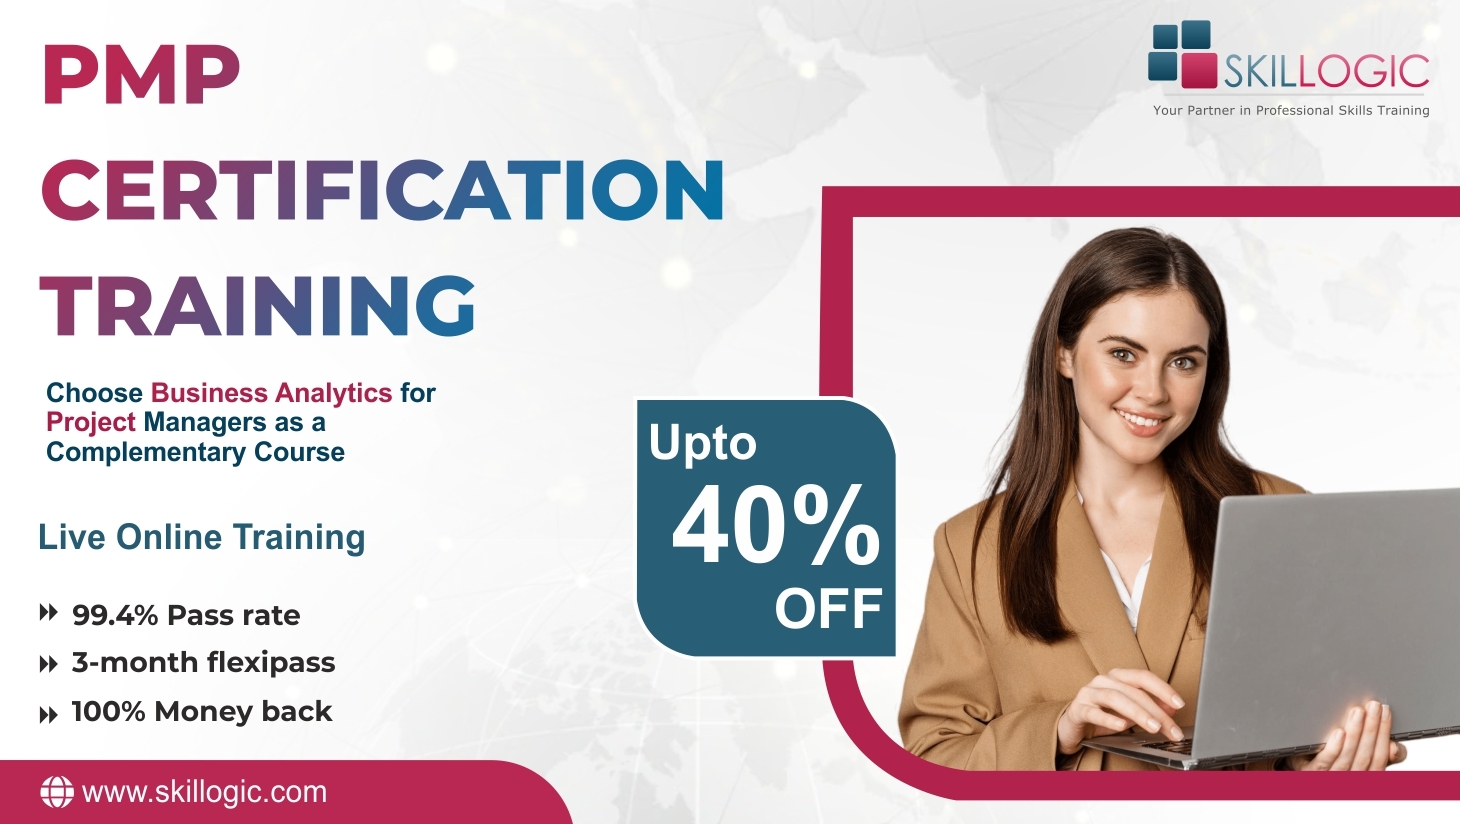 PMP training Course in Bangalore, Online Event